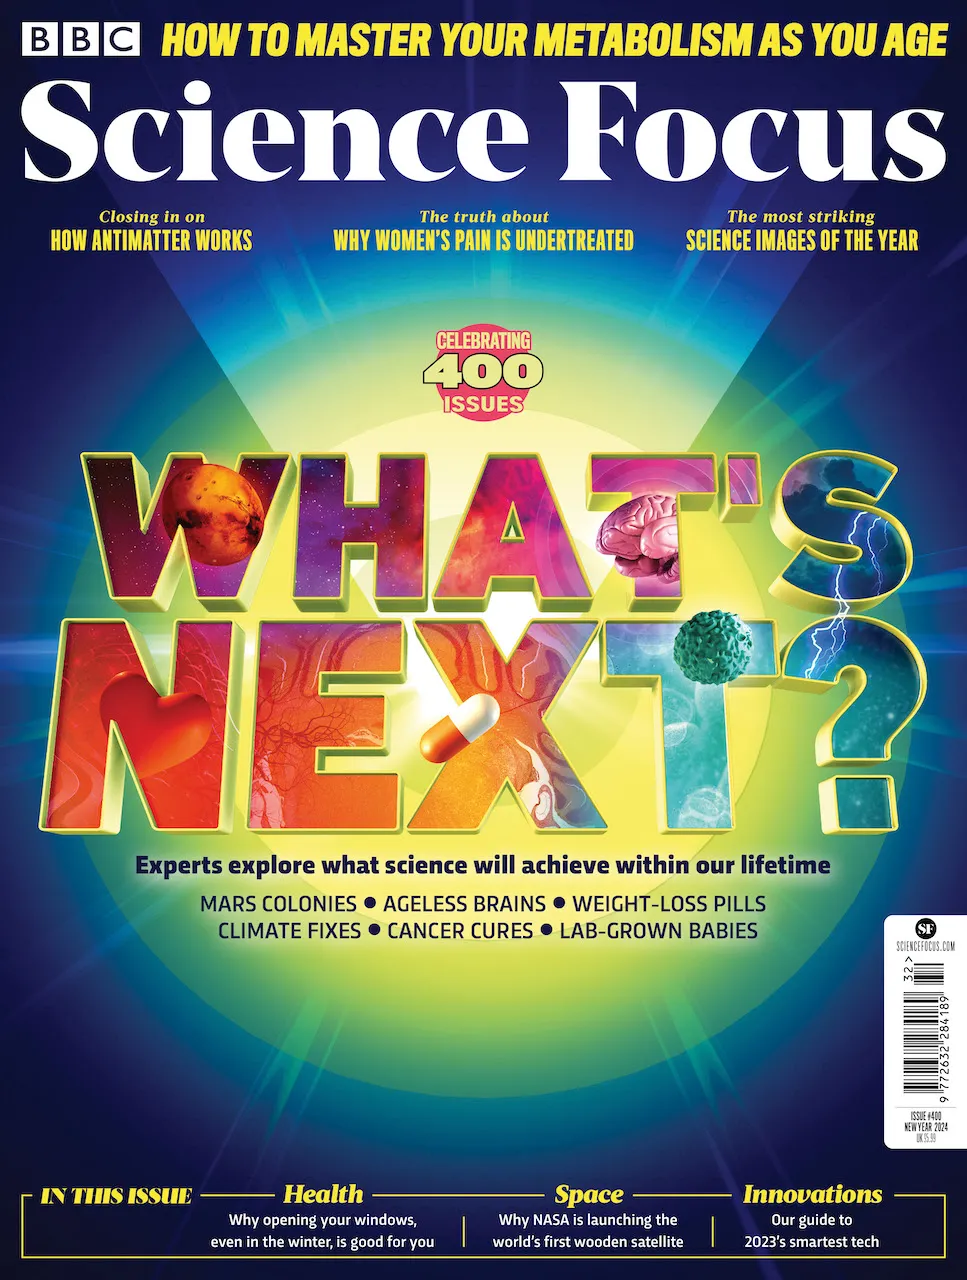 The front cover of BBC Science Focus magazine